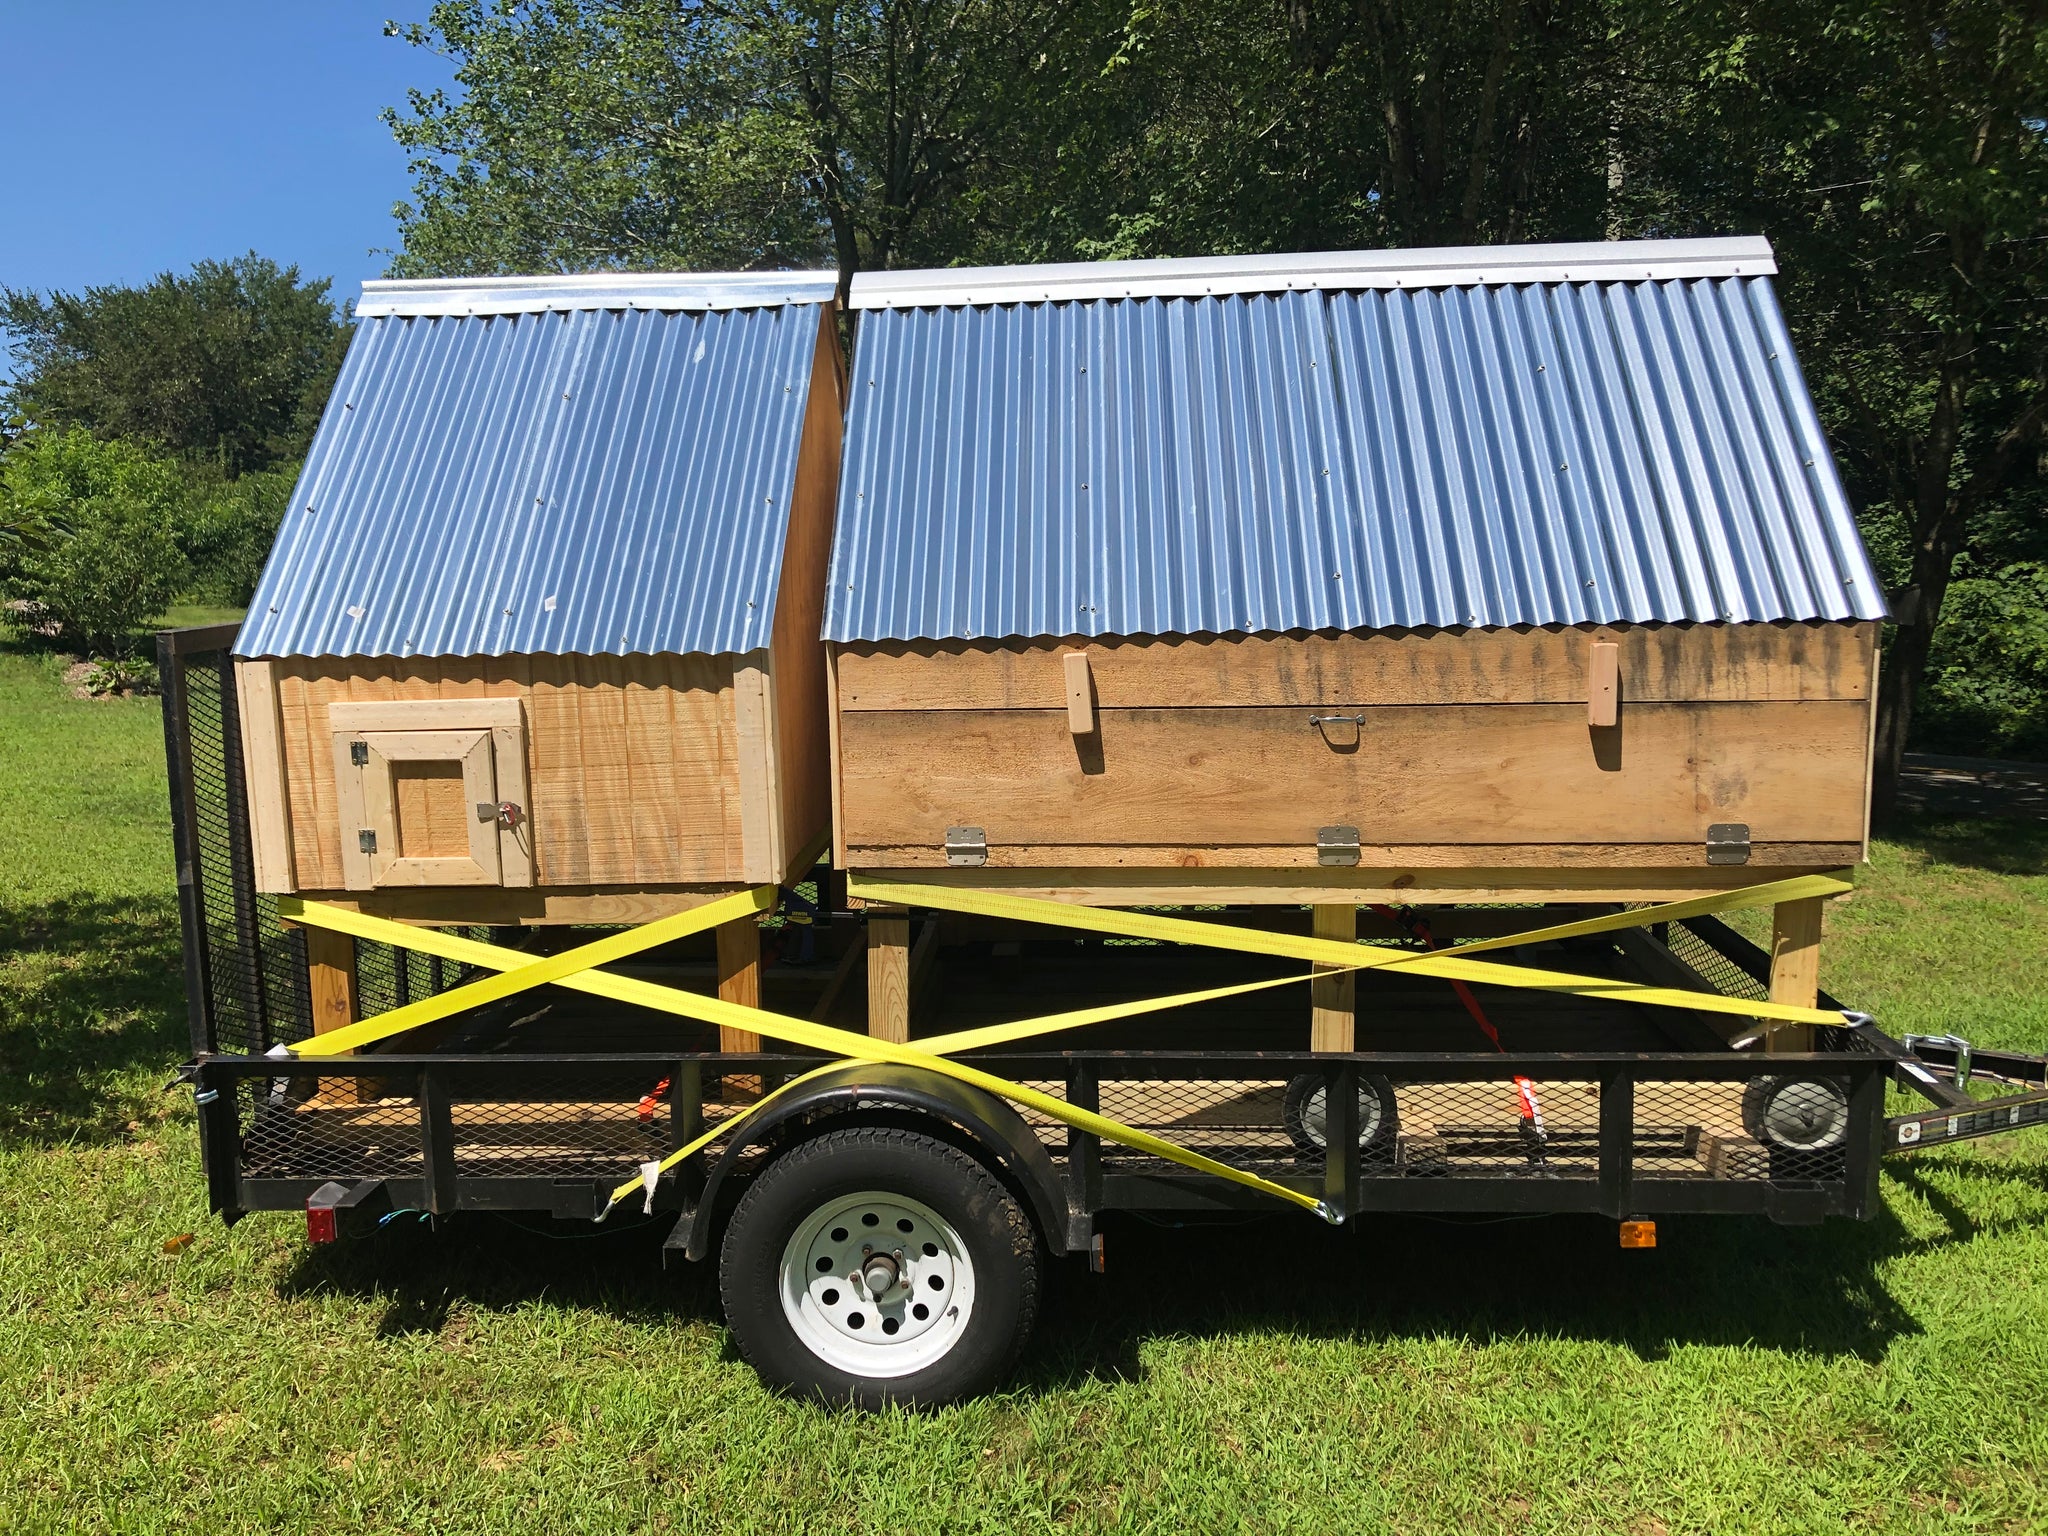 The Double Cape - Chicken Coop for 12+ hens